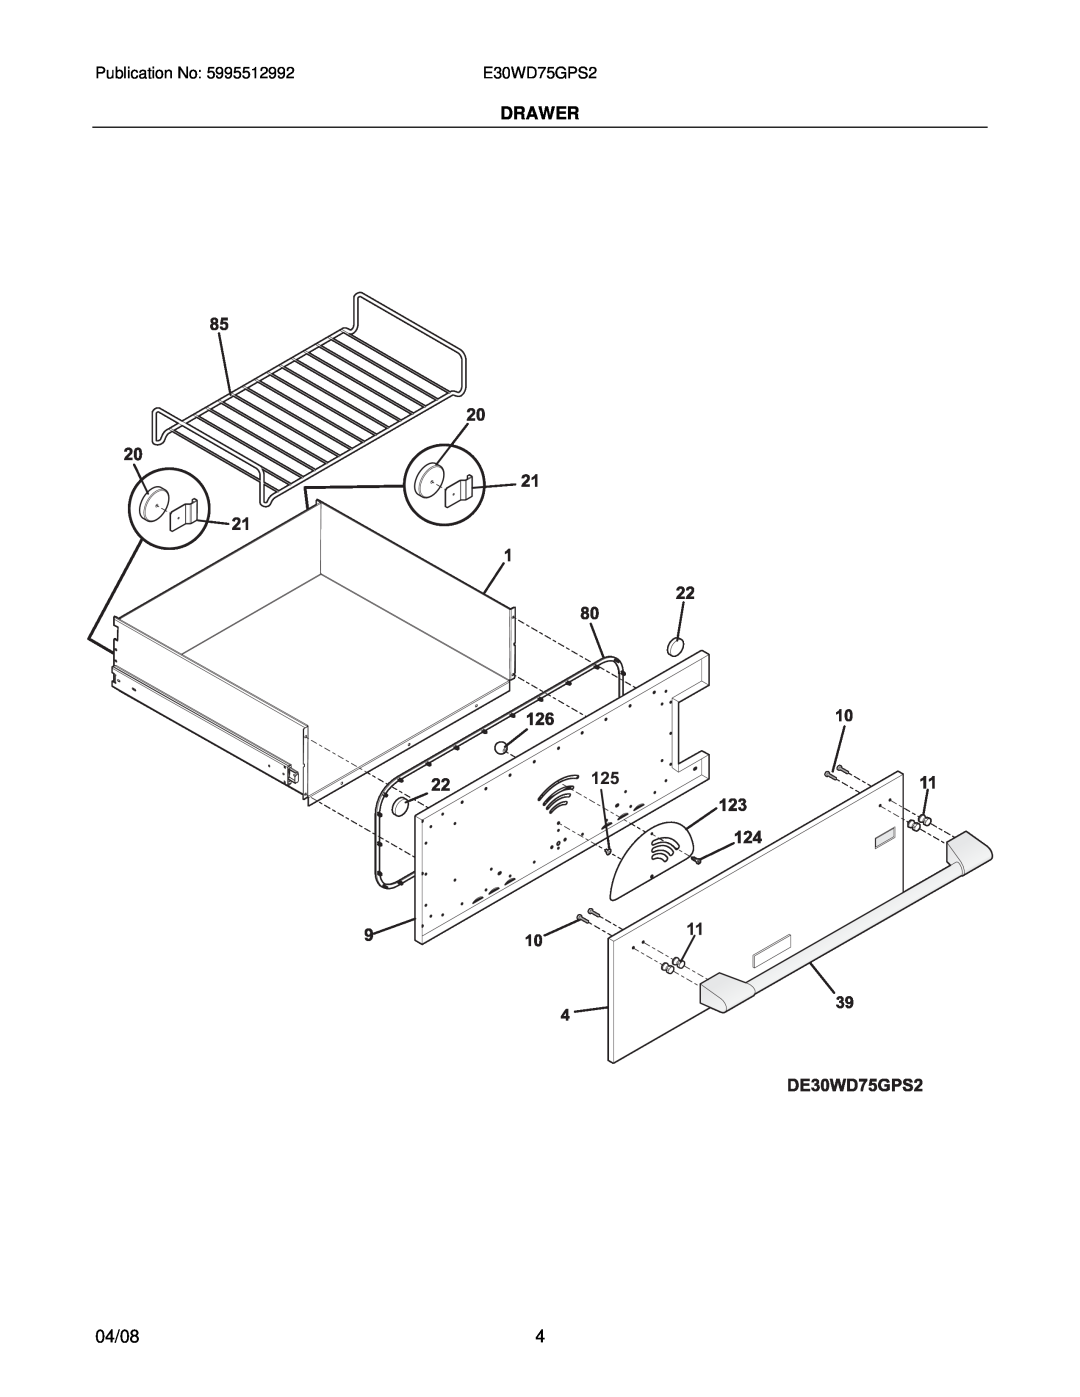 Electrolux 31266300970S2 installation instructions Drawer, 04/08, E30WD75GPS2 